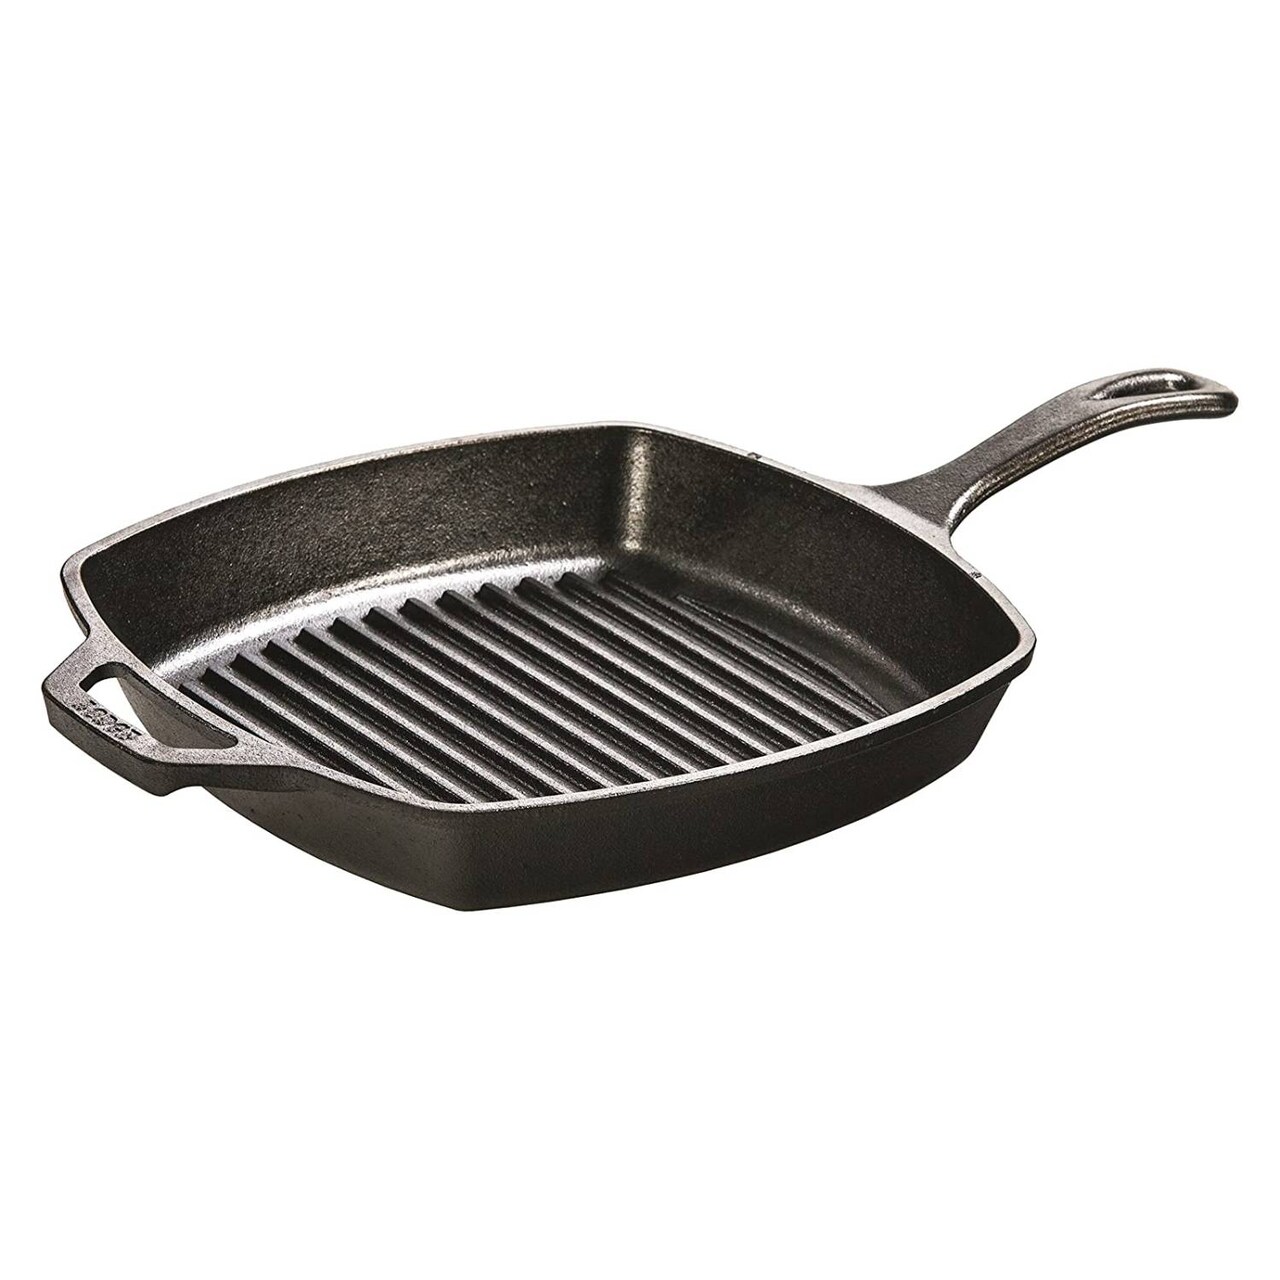 Lodge Cast Iron Square Grill Pan for Indoor/Outdoor Use, 10.5